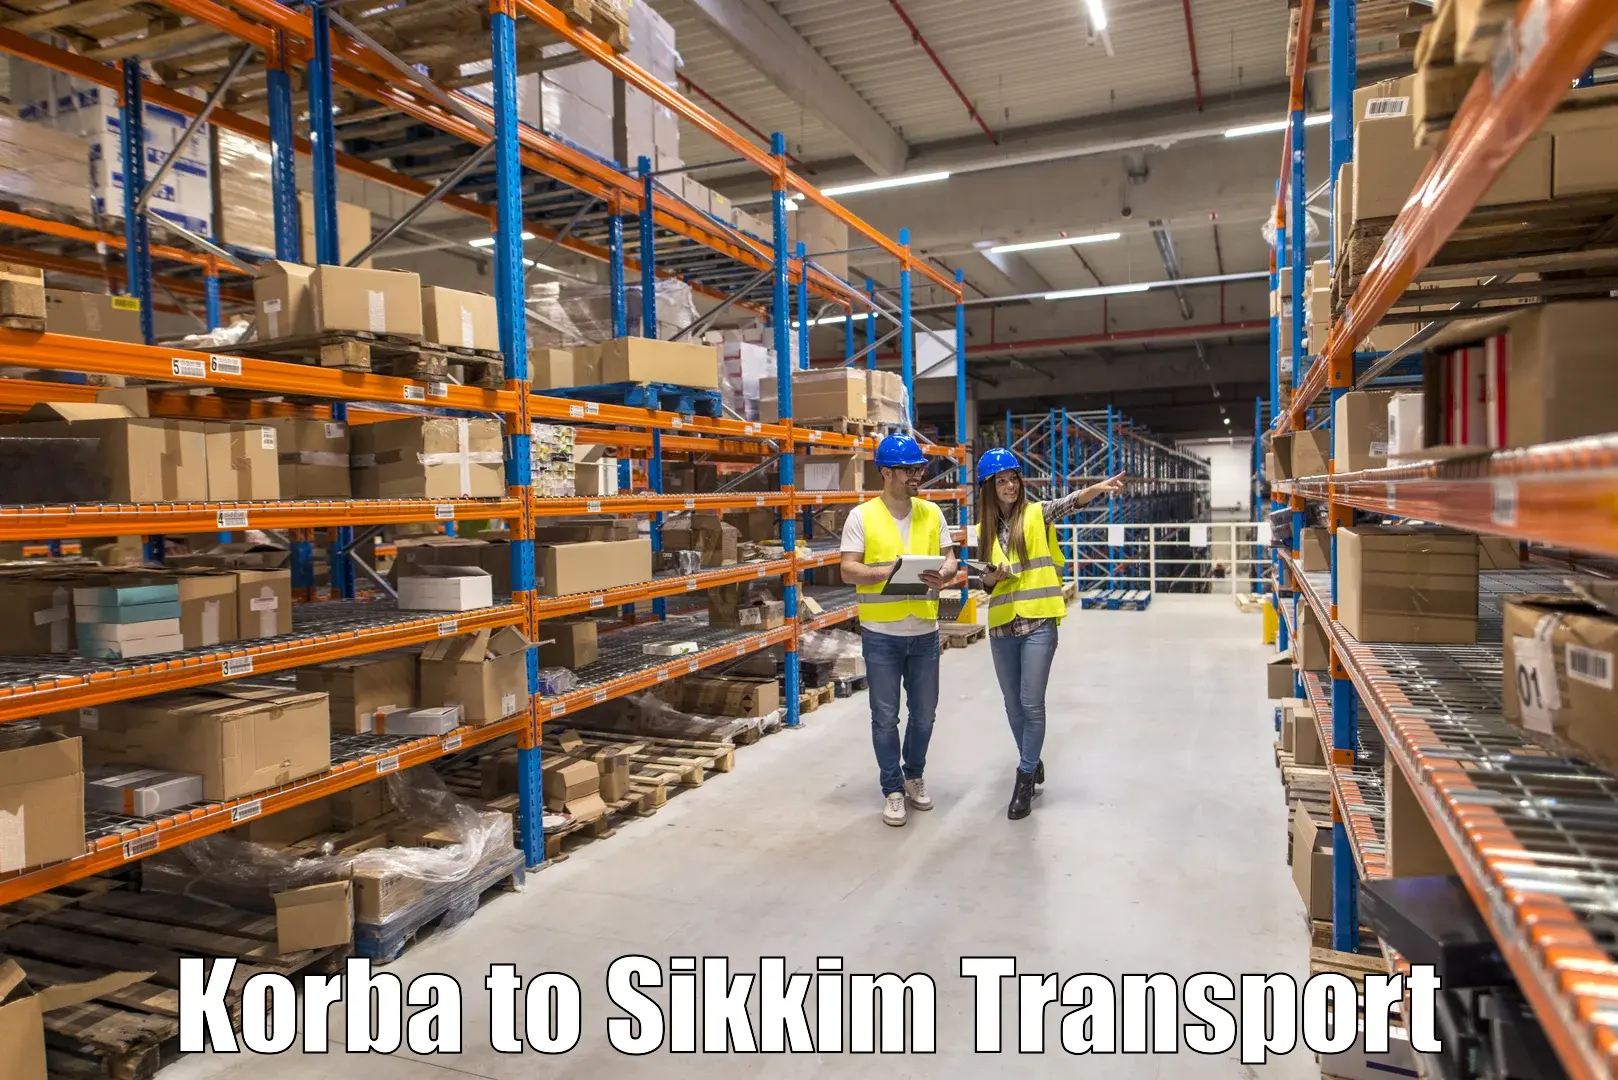 Commercial transport service Korba to North Sikkim